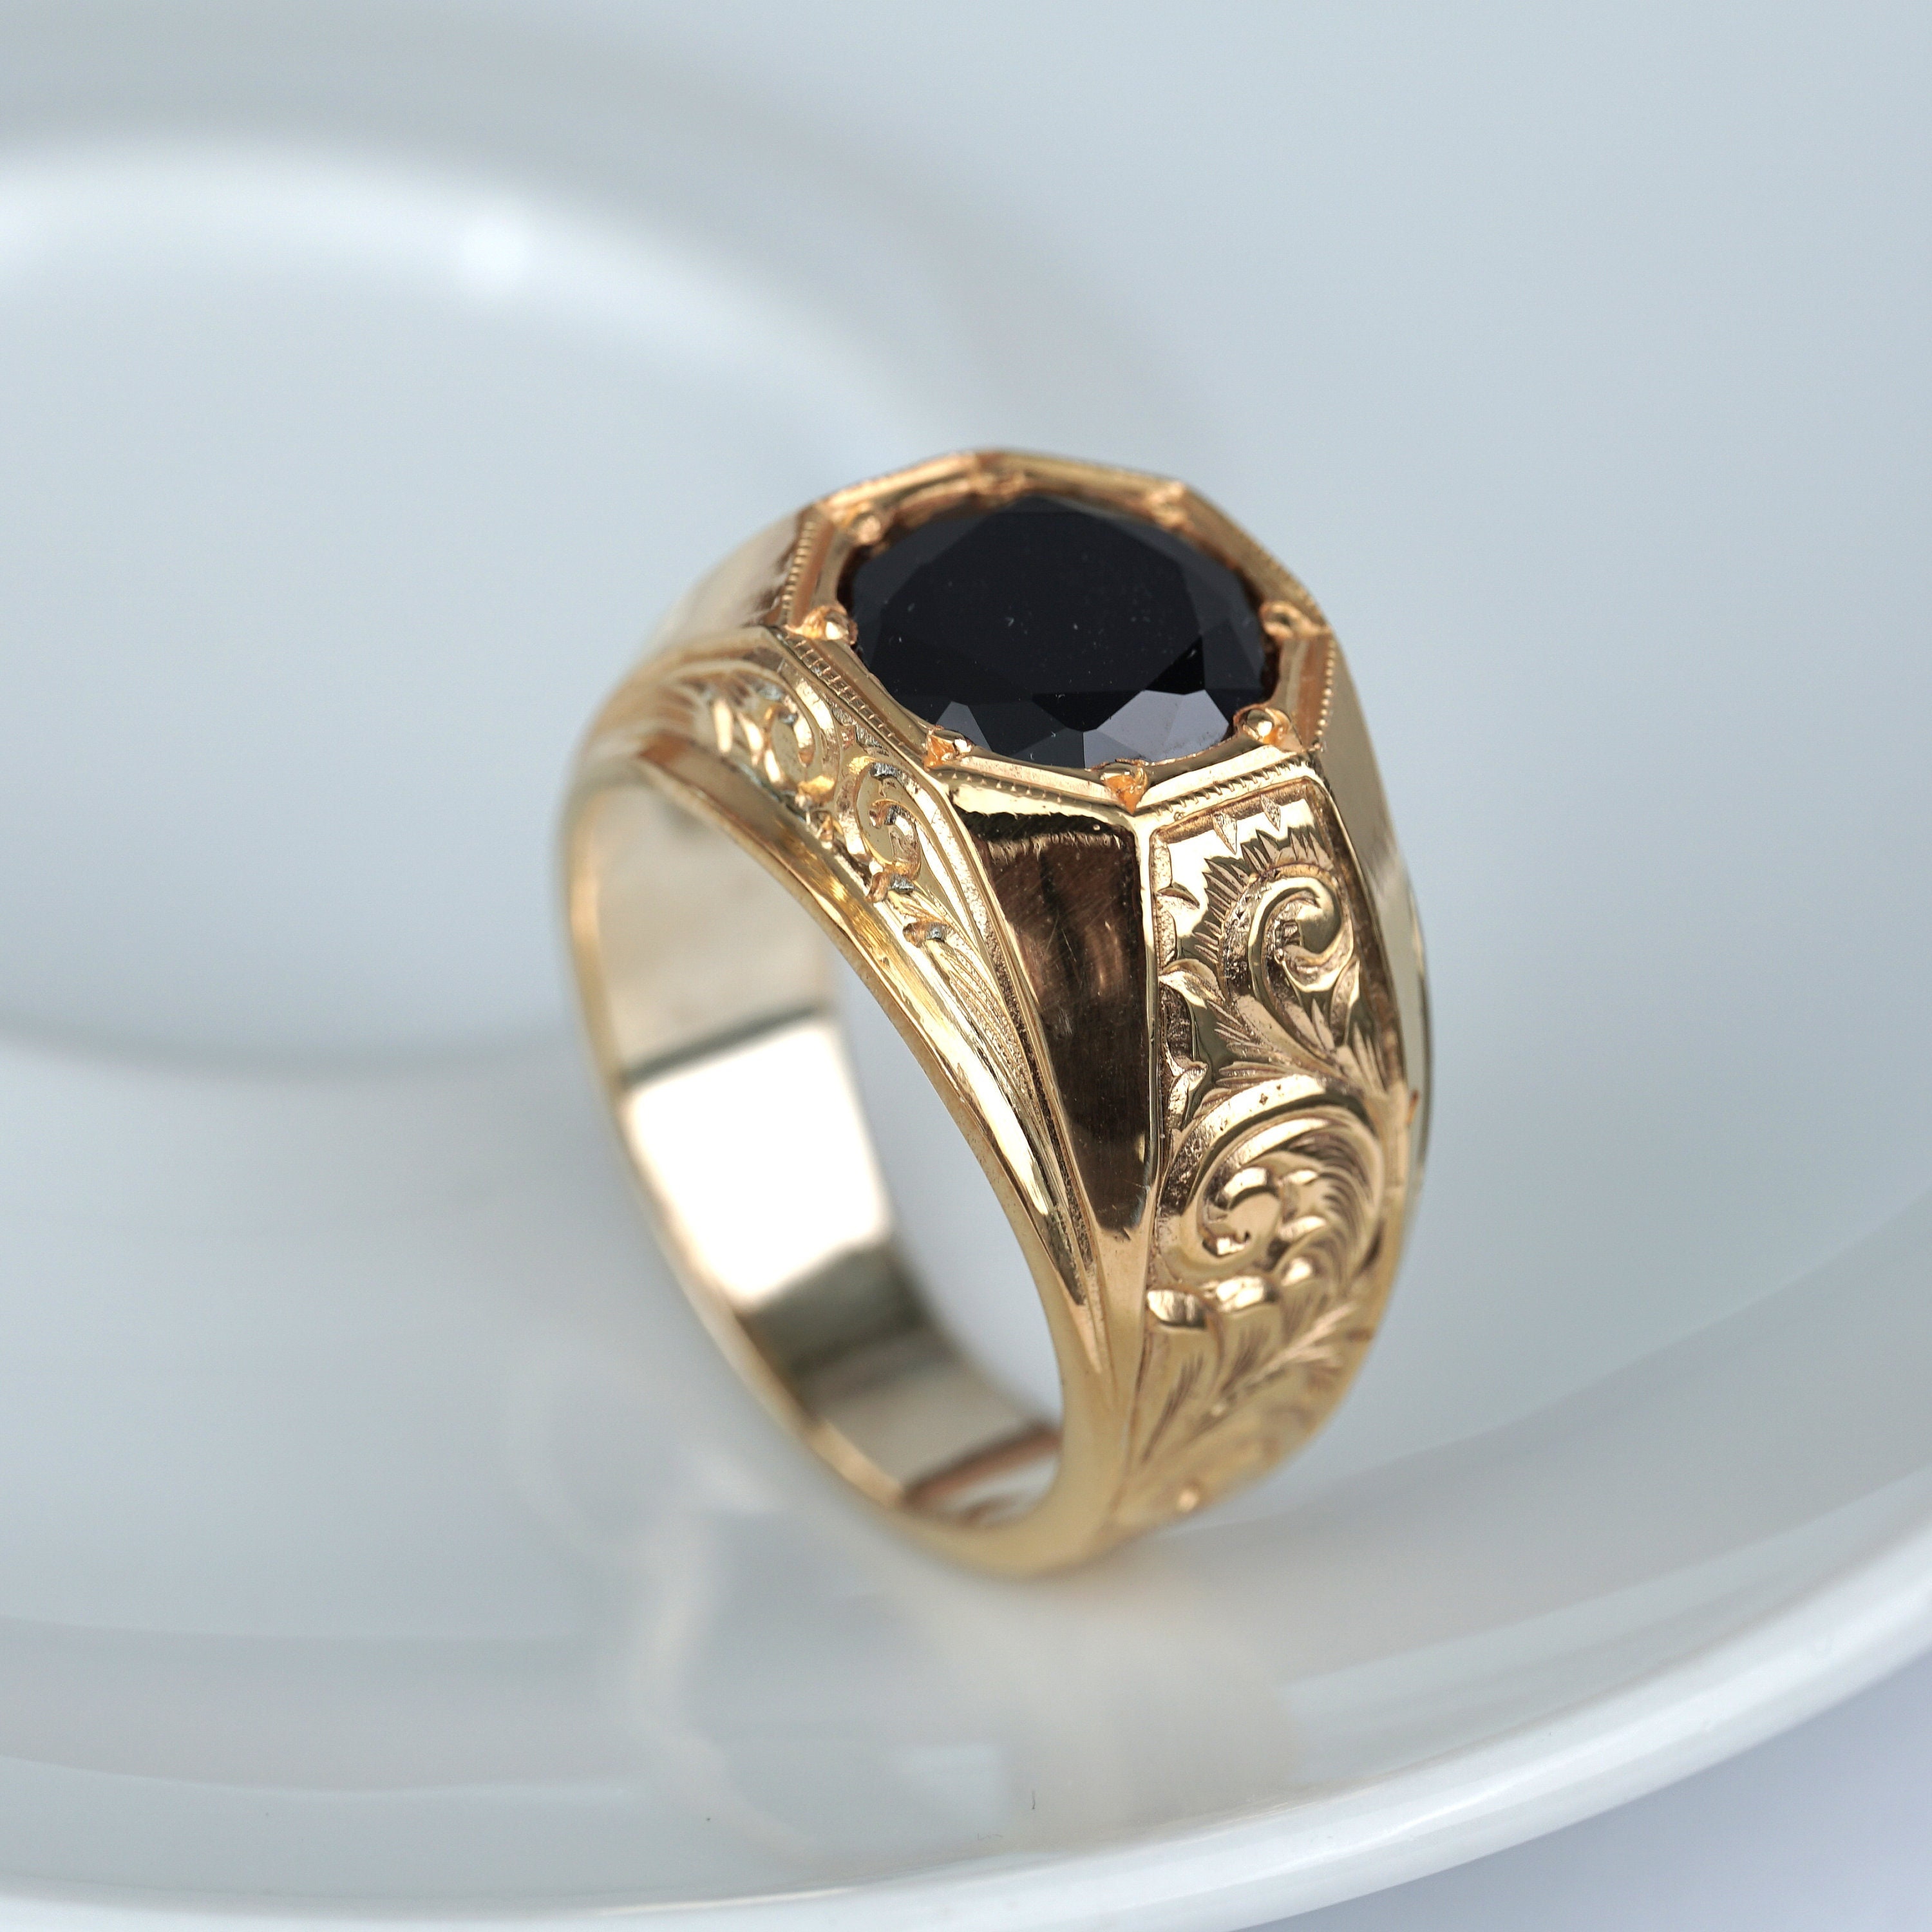 Nationalonlinediscounts Stainless Steel Shriner Black Onyx Gold Electroplated Ring Sizes 8,9,10,11,12 & 13 